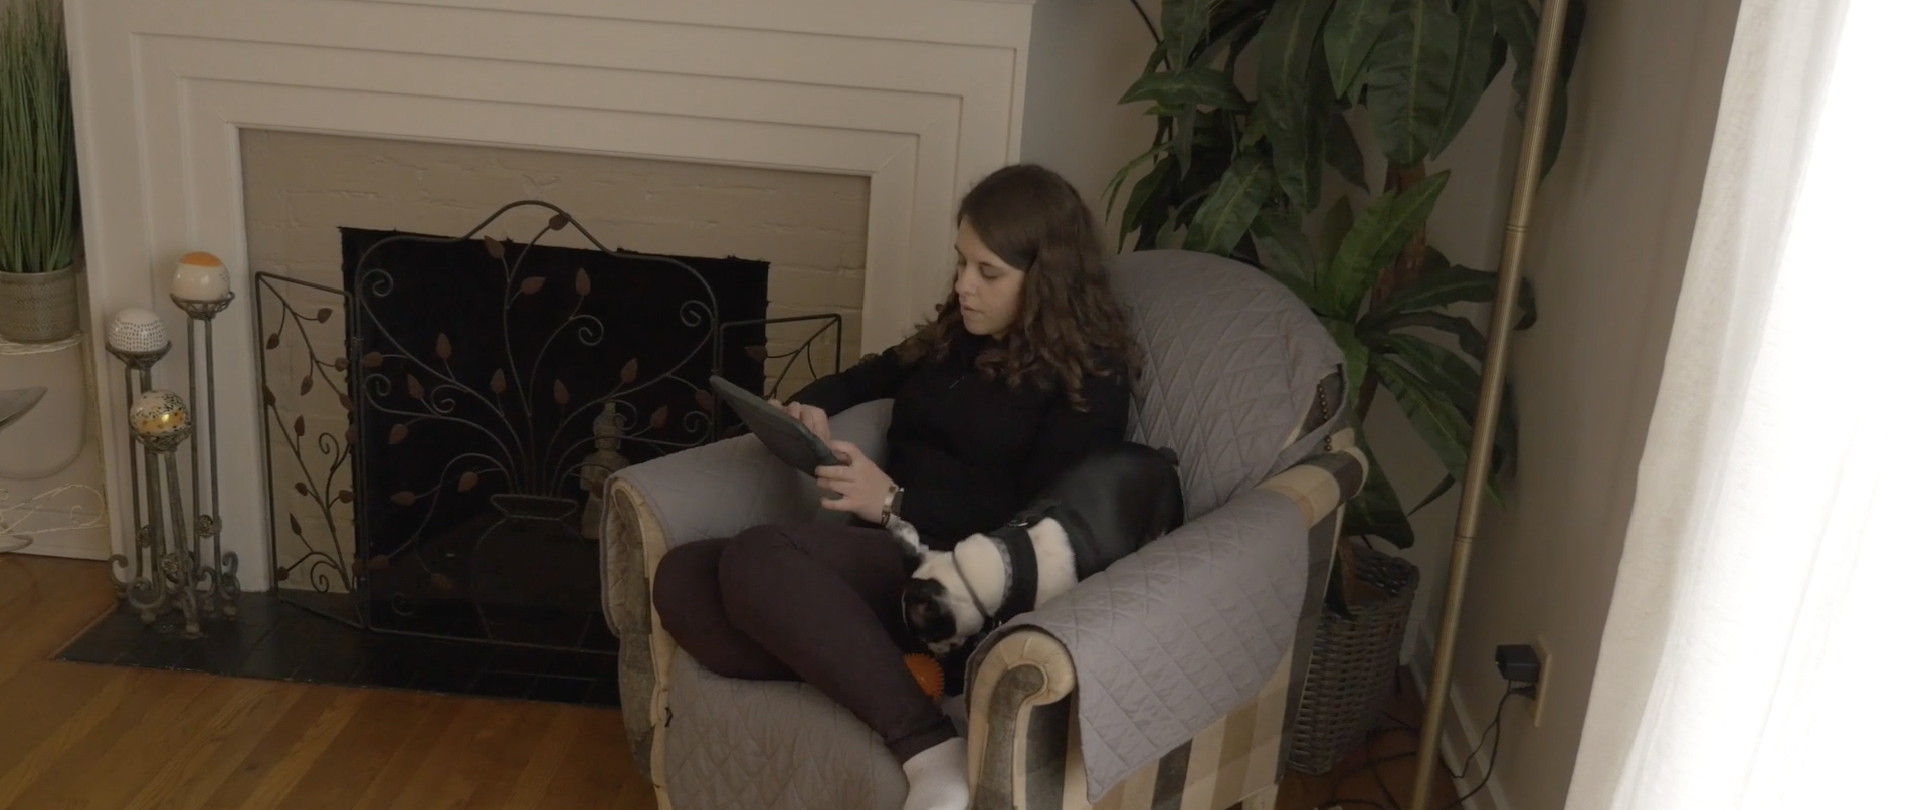 Jordyn in an armchair with communication device